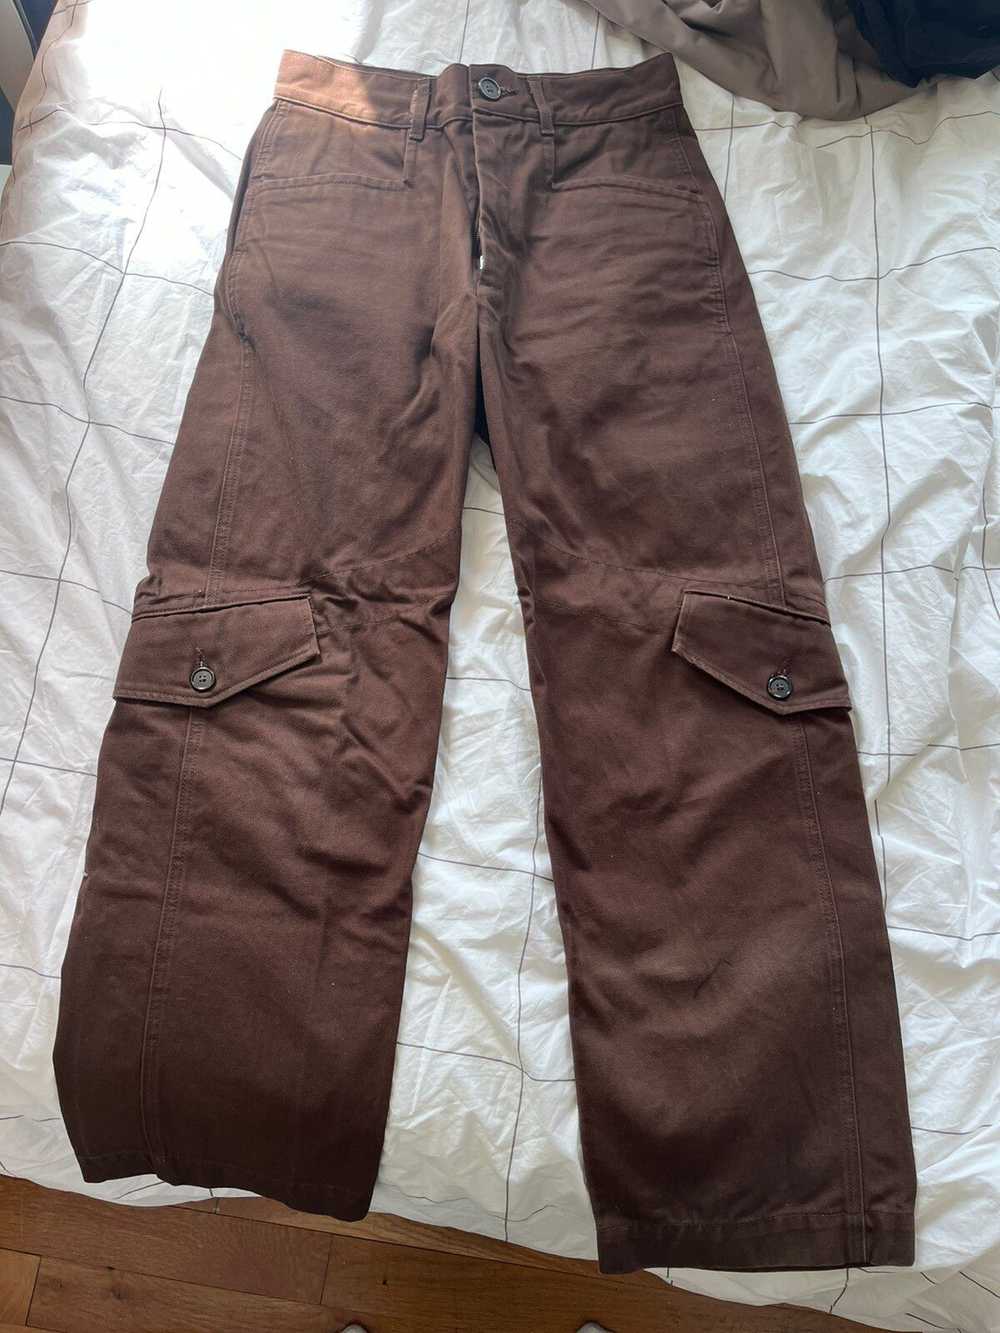 And Austin And Austin - Brown Work Pants (size M) - image 1